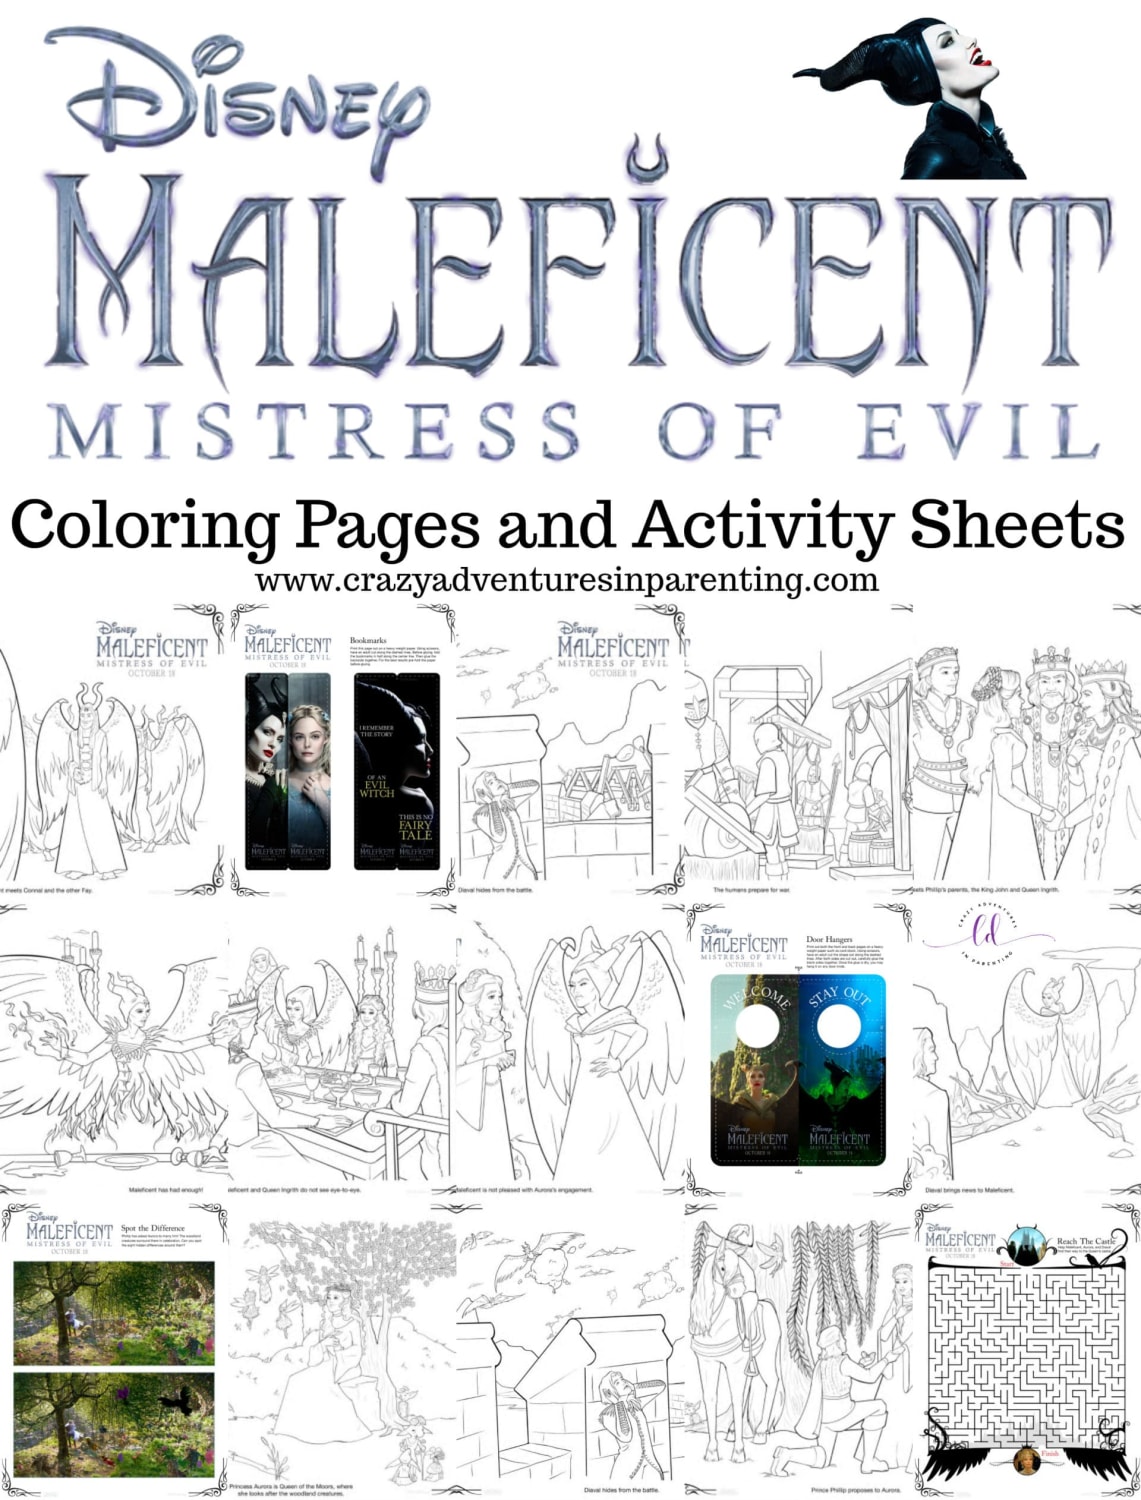 Maleficent 2 Coloring Pages and Activity Sheets